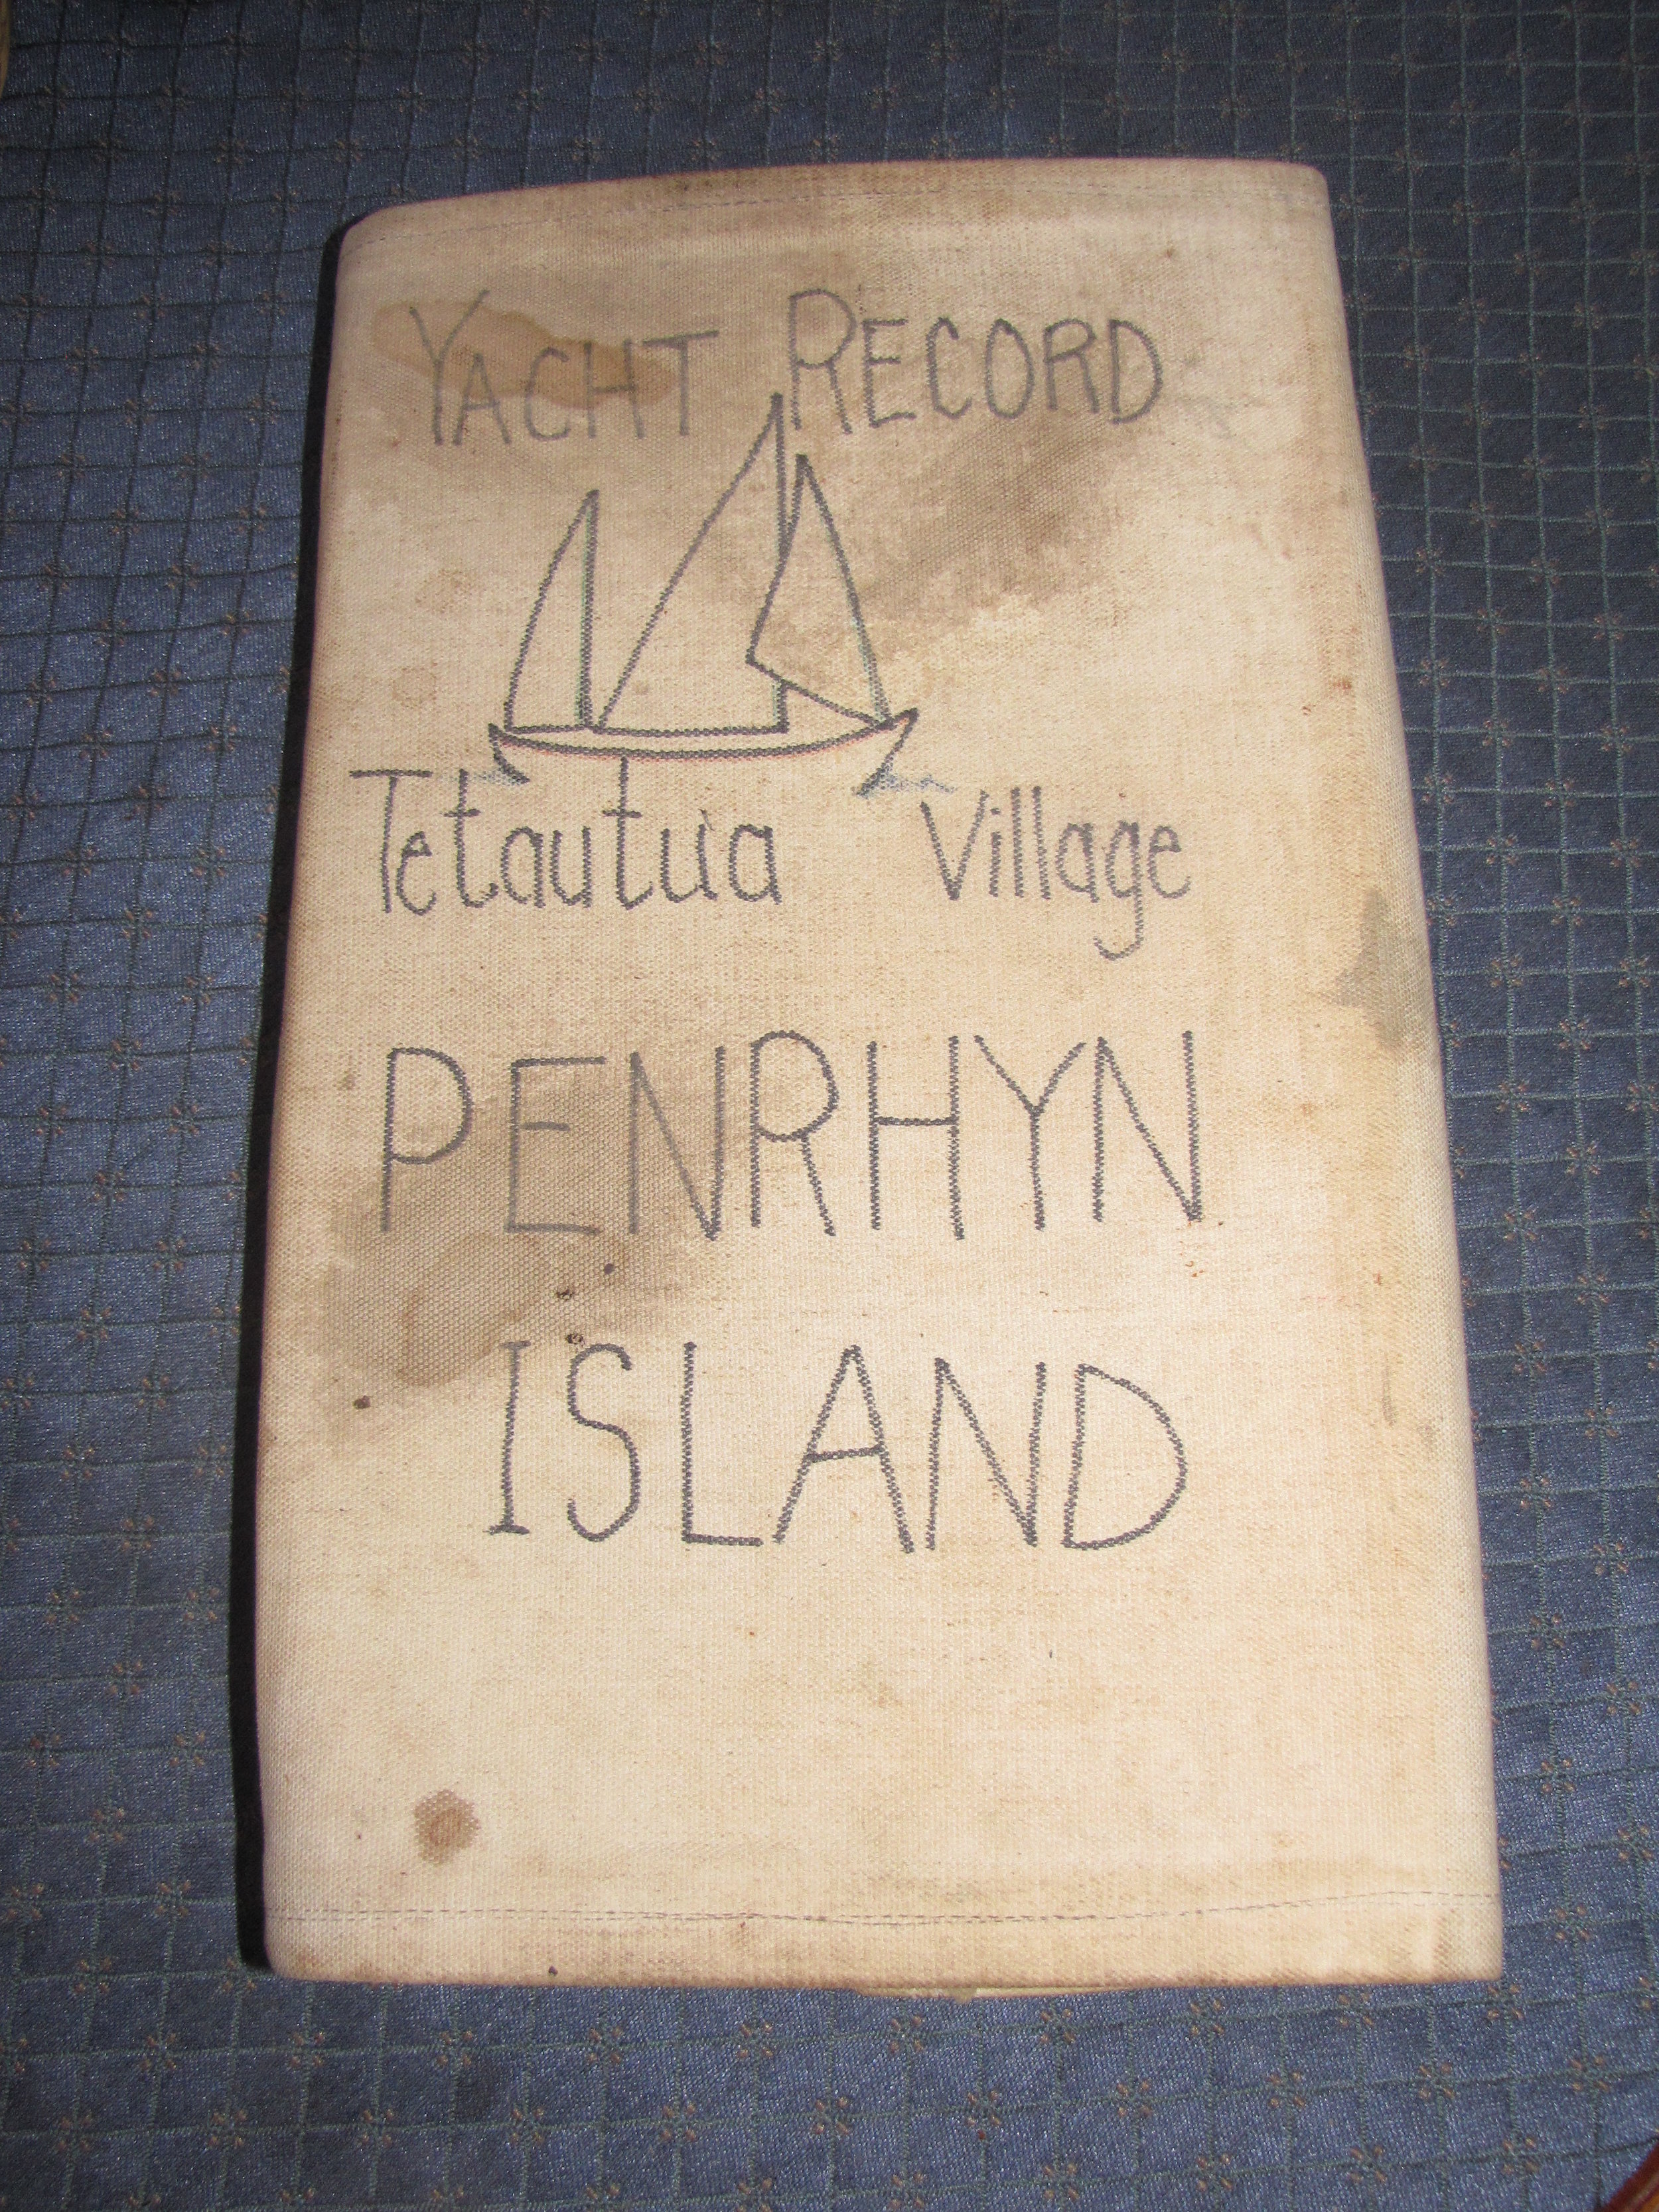 Yacht Record left by John Neal in 1987.